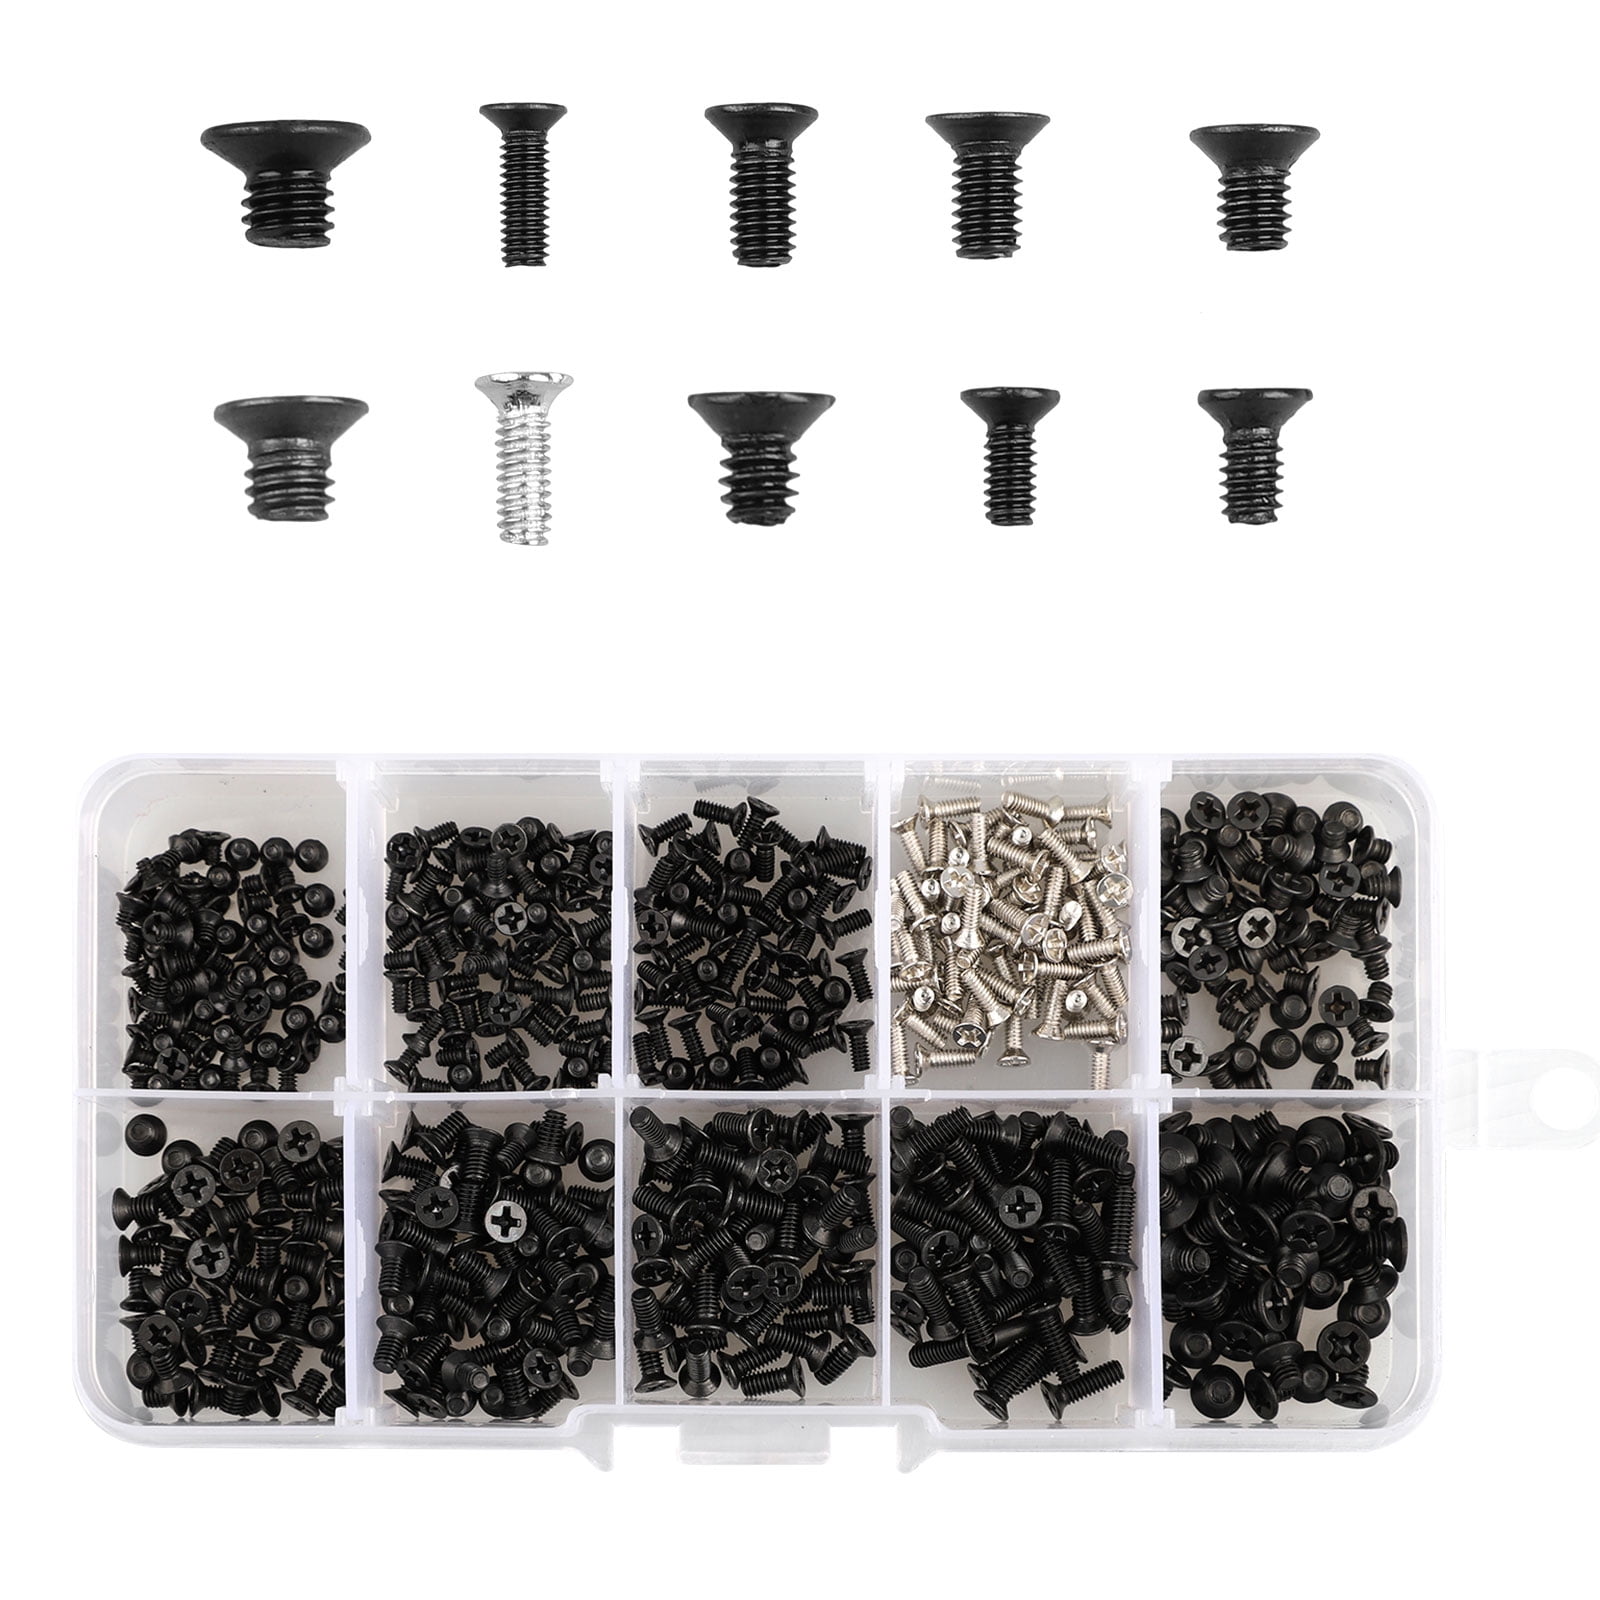 Happy Shop Screw 20-100Pcs M1 M2 M2.5 M3 M4 KM Screw SSD Electronic Repair Screws Accessories Compatible with Sony DELL Samsung IBM HP Toshiba Bolts Nuts Color : Black, Size : 10mm 